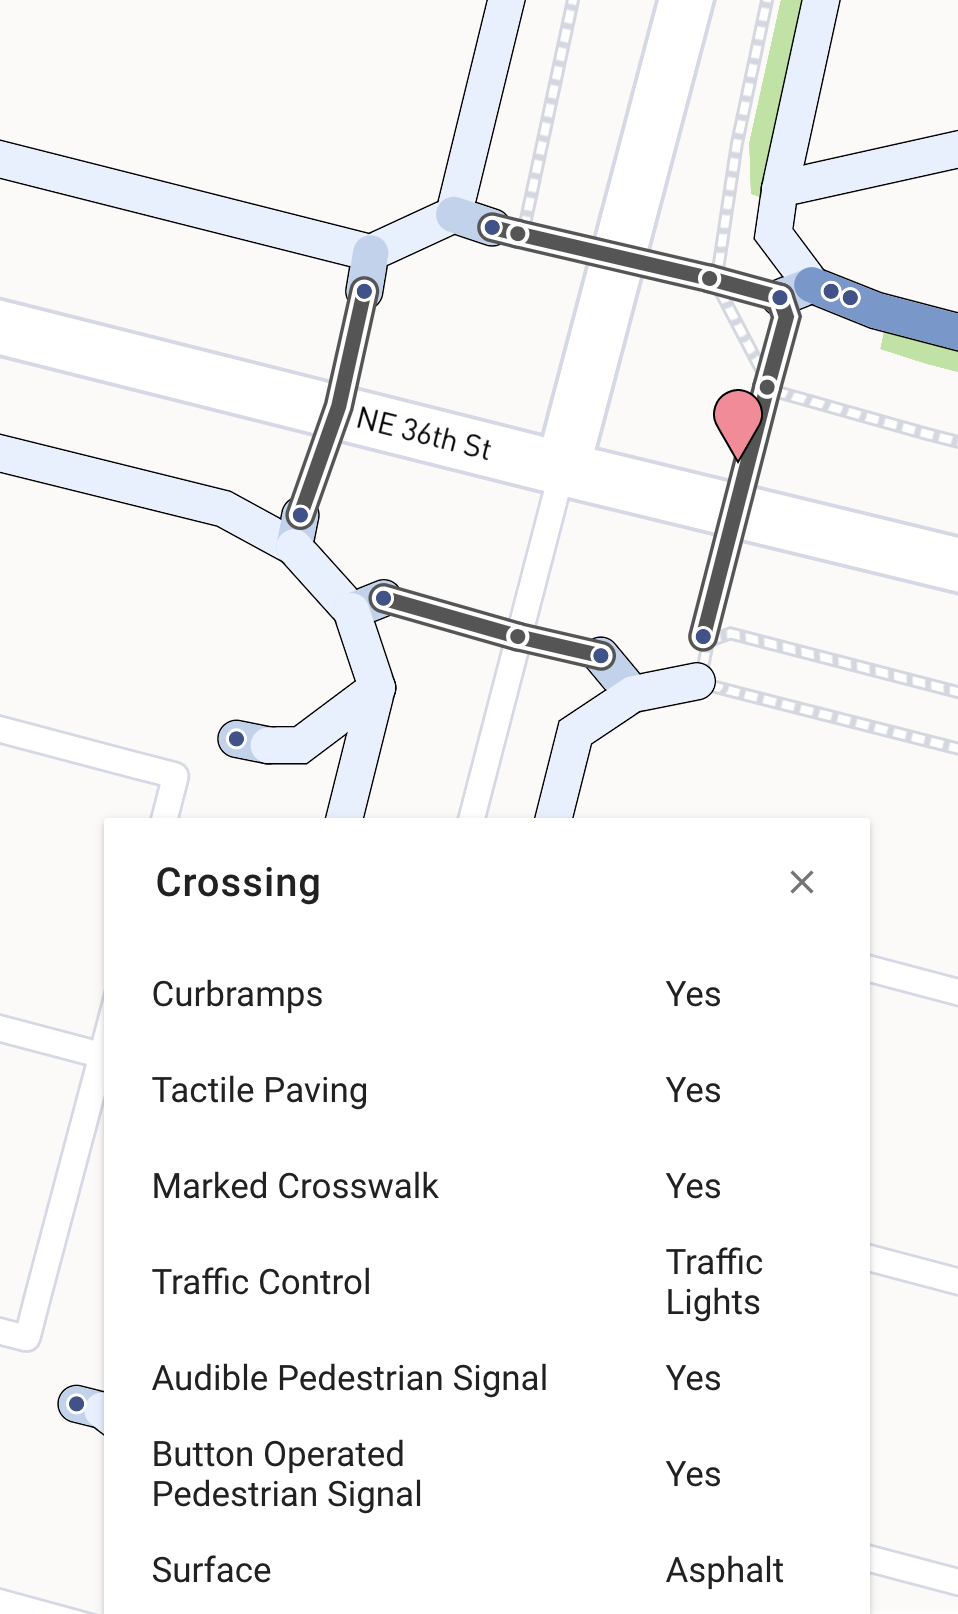 A screenshot the information displayed when a crossing is clicked on in AccessMap. This information includes whether the crossing is marked/unmarked, how the intersection is controlled, whether the pedestrian signal is auditory and/or button-operated, the surface of the crossing, and whether there is tactile paving/curbramps.